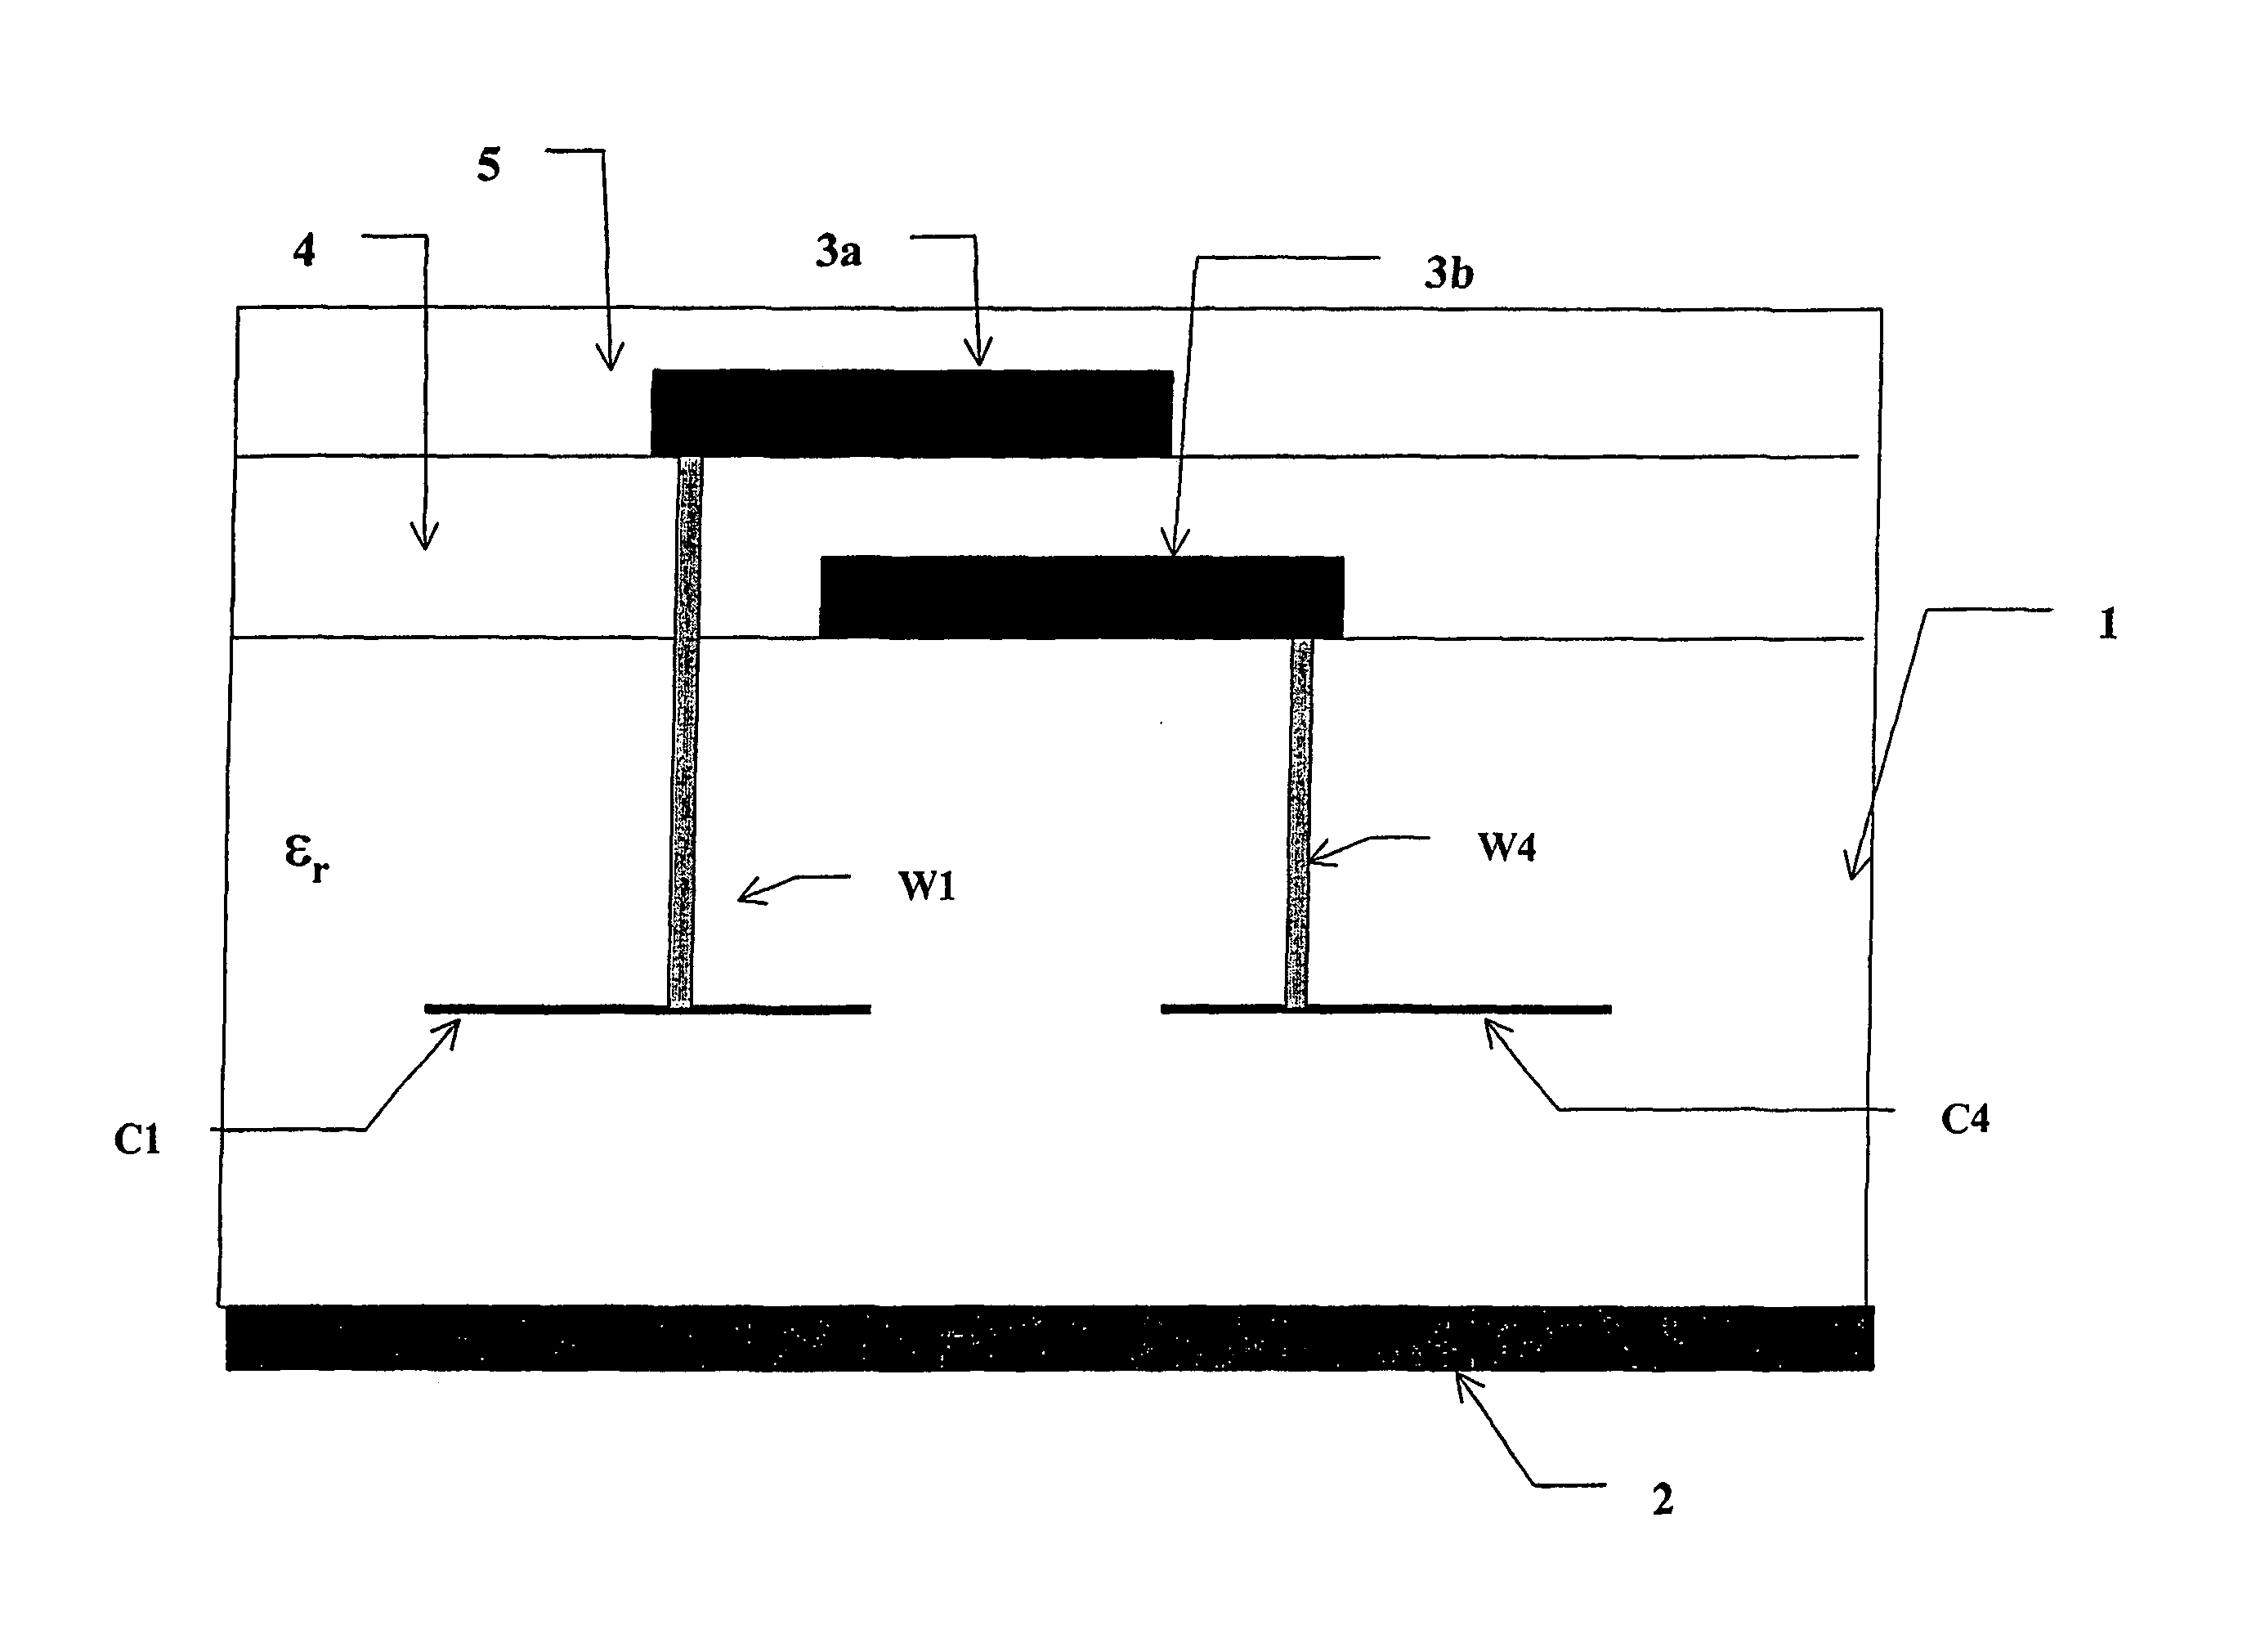 Coupling device using buried capacitors in multilayered substrate